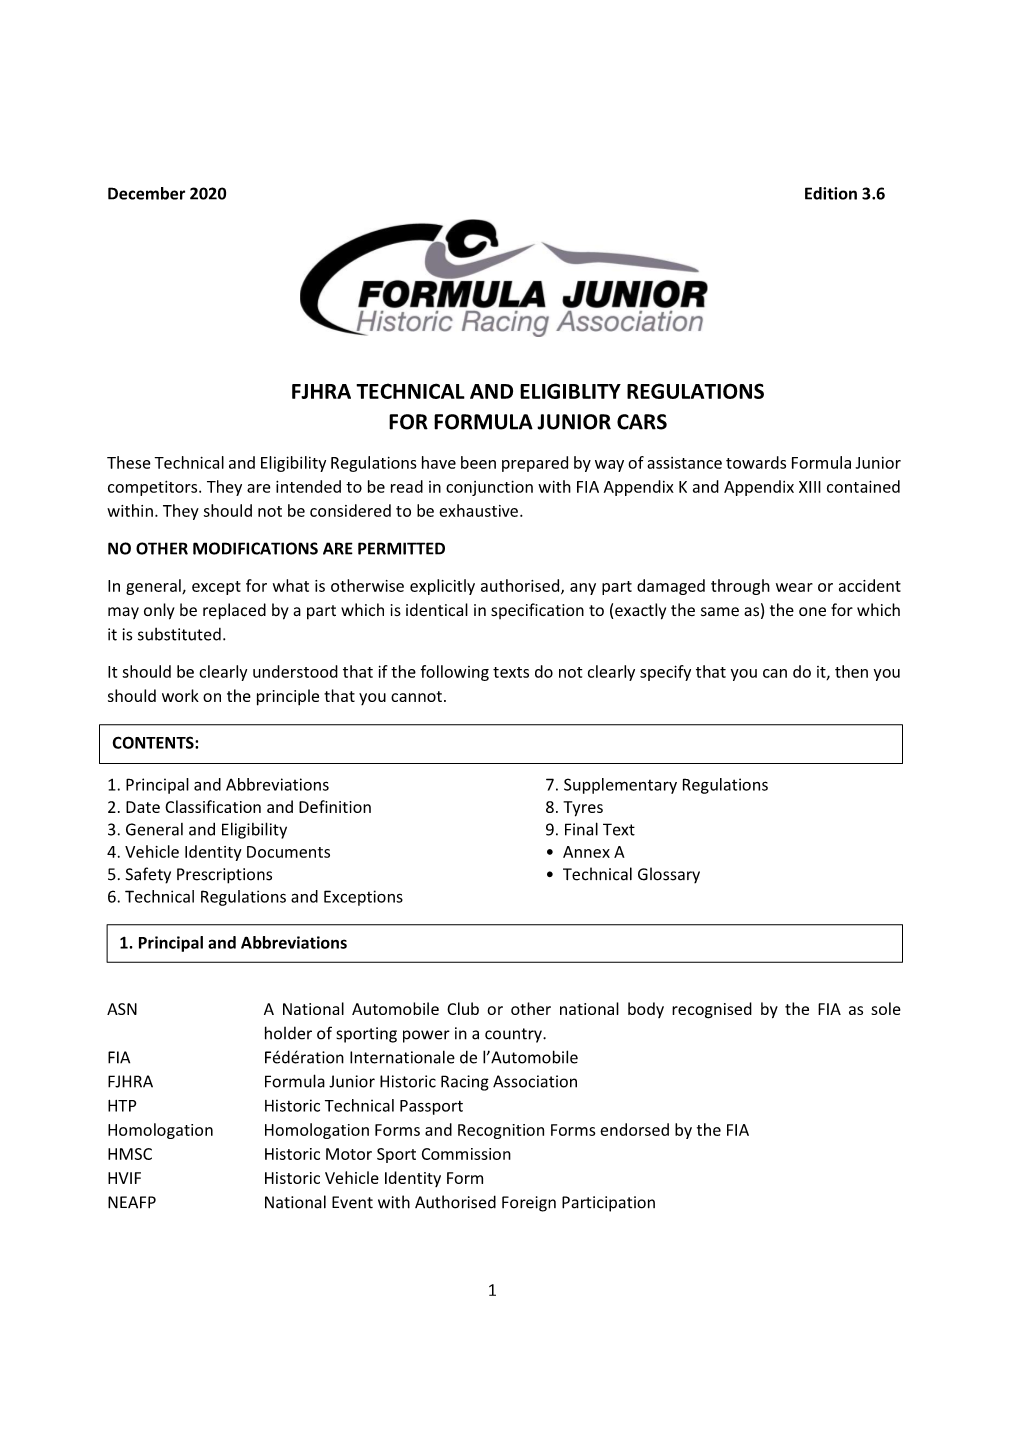 Fjhra Technical and Eligiblity Regulations for Formula Junior Cars